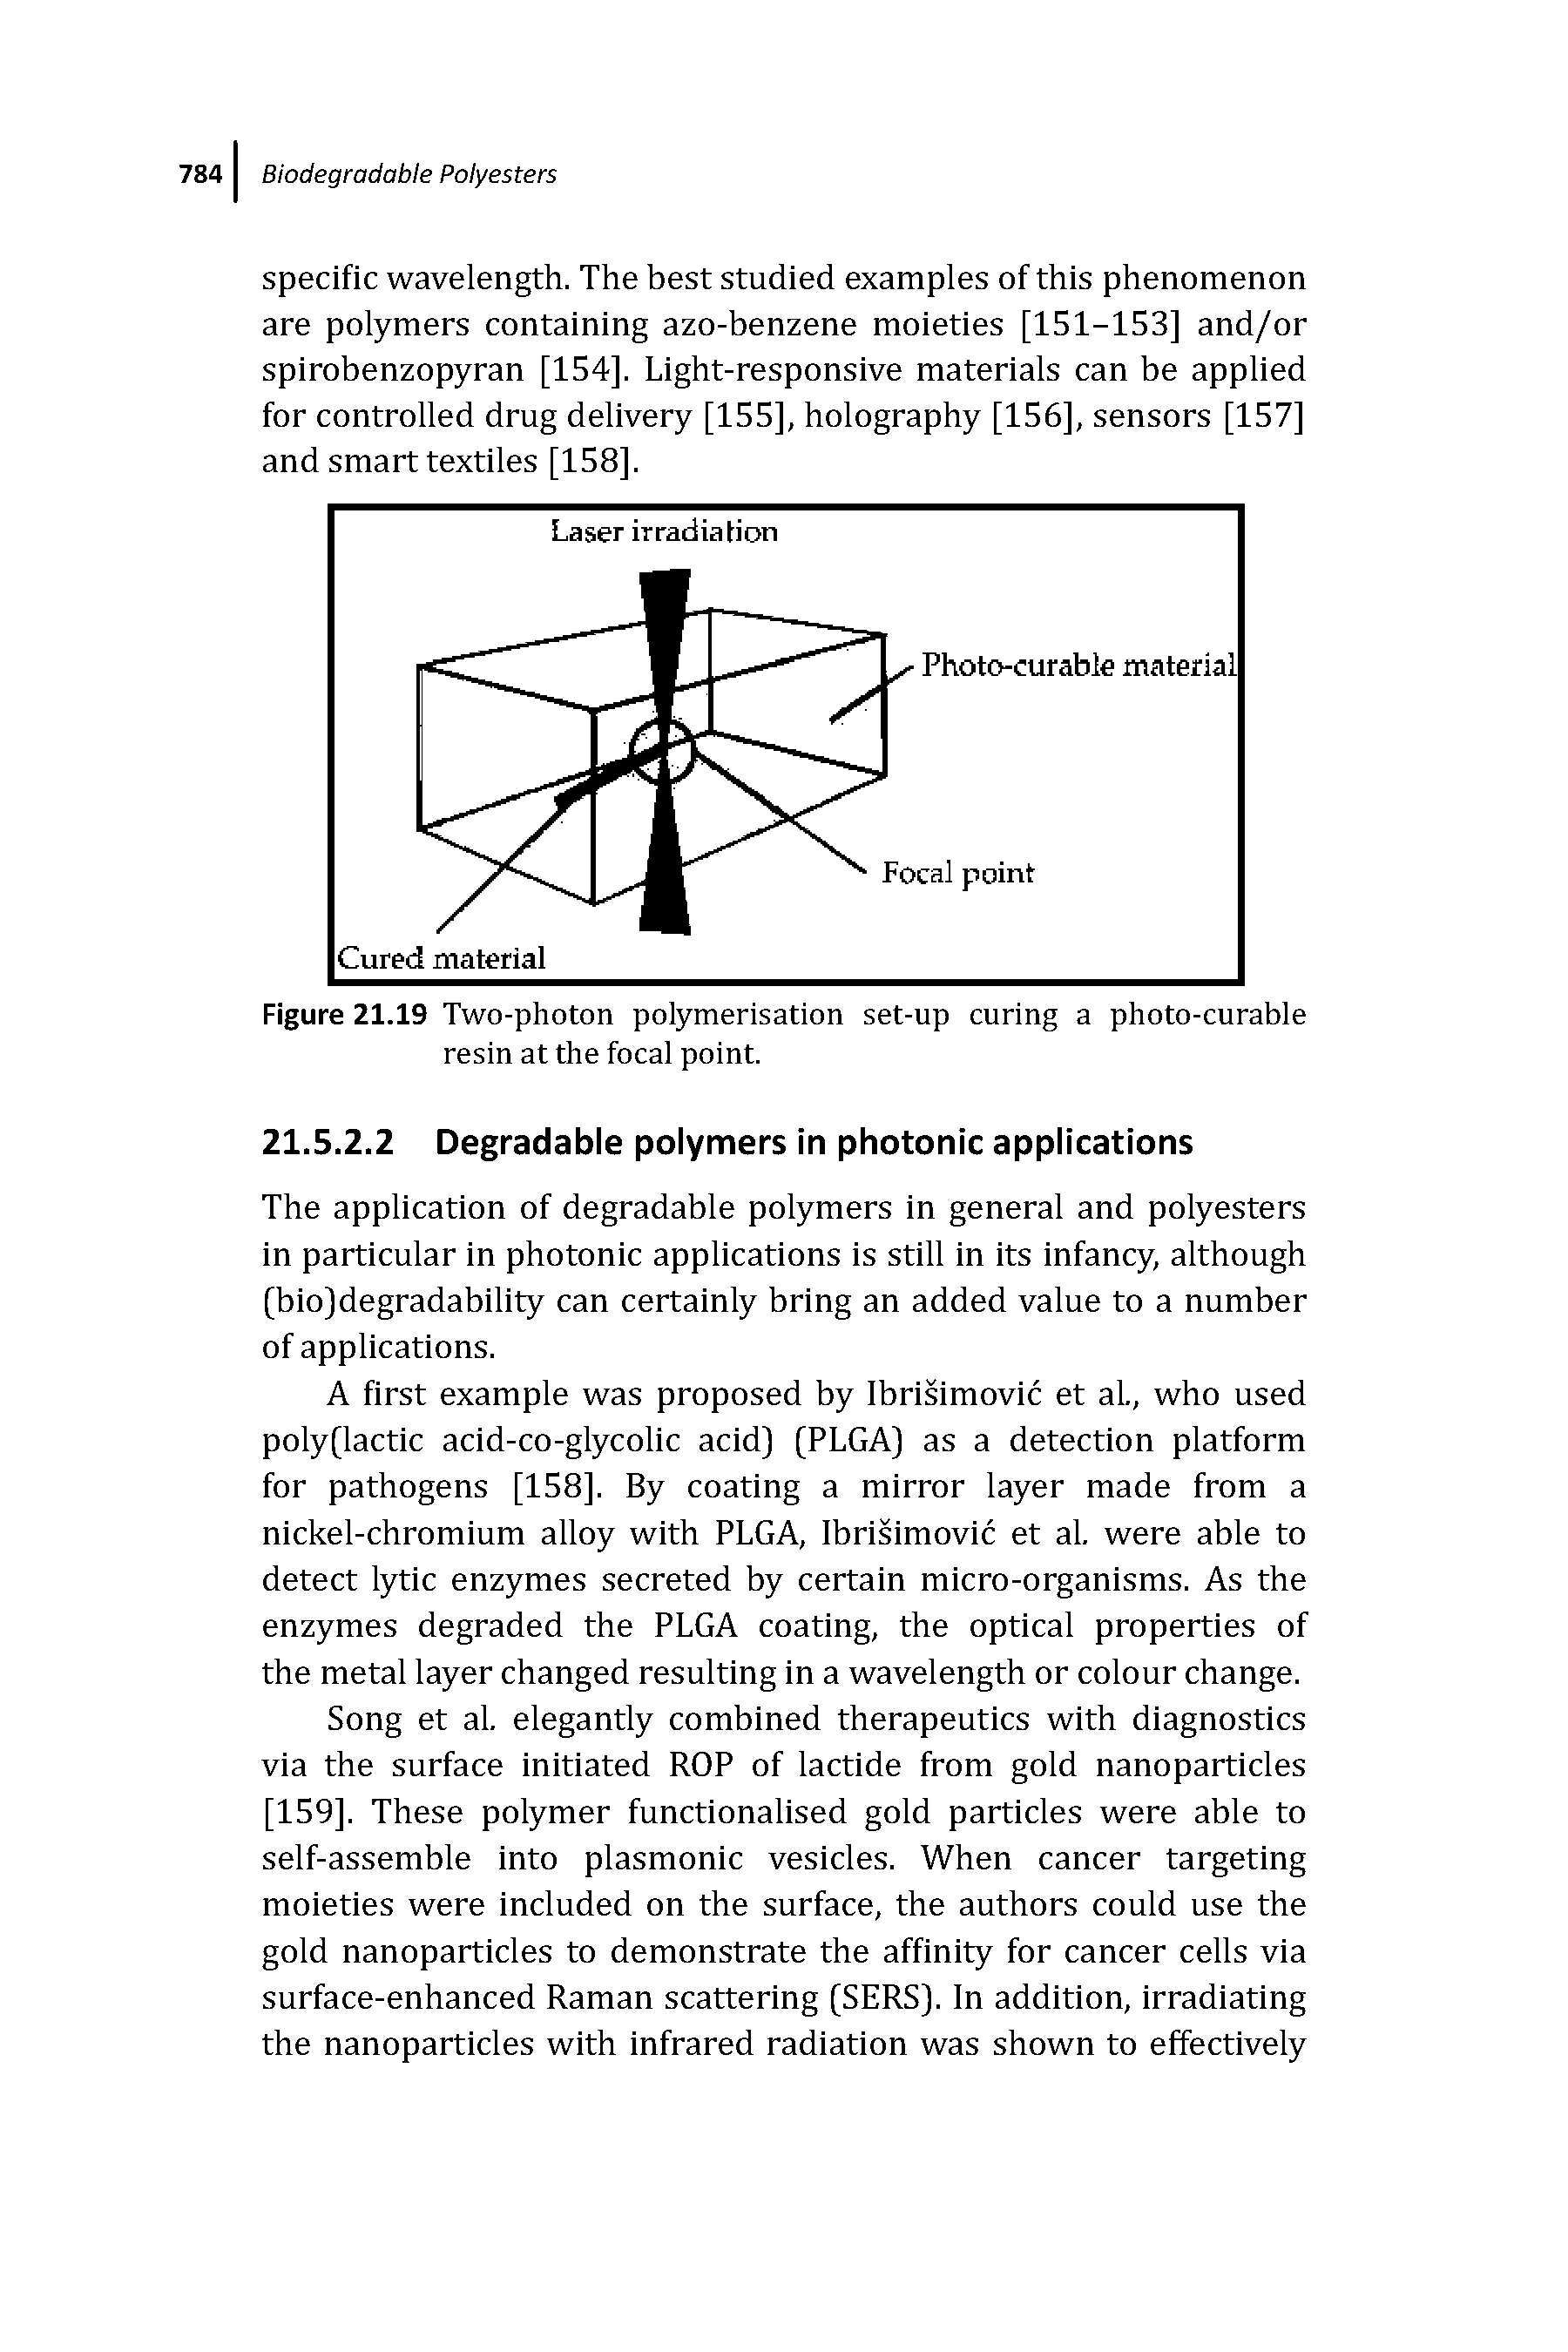 Figure 21.19 Two-photon polymerisation set-up curing a photo-curable resin at the focal point.